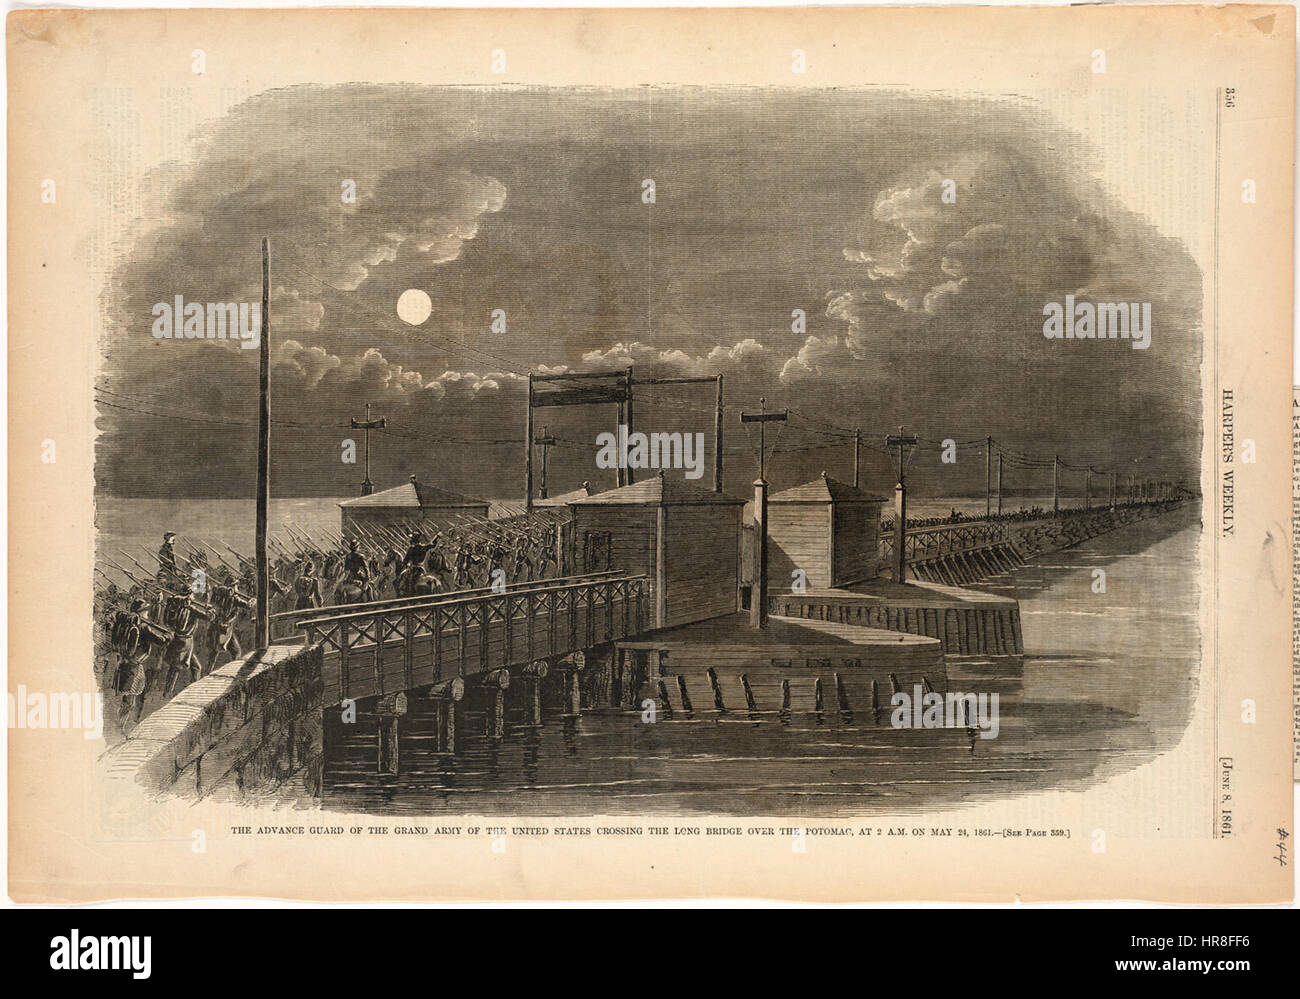 The advance guard of the Grand Army of the United States crossing the Long Bridge over the Potomac, at 2 A.M. on May 24, 1861 (Boston Public Library) Stock Photo